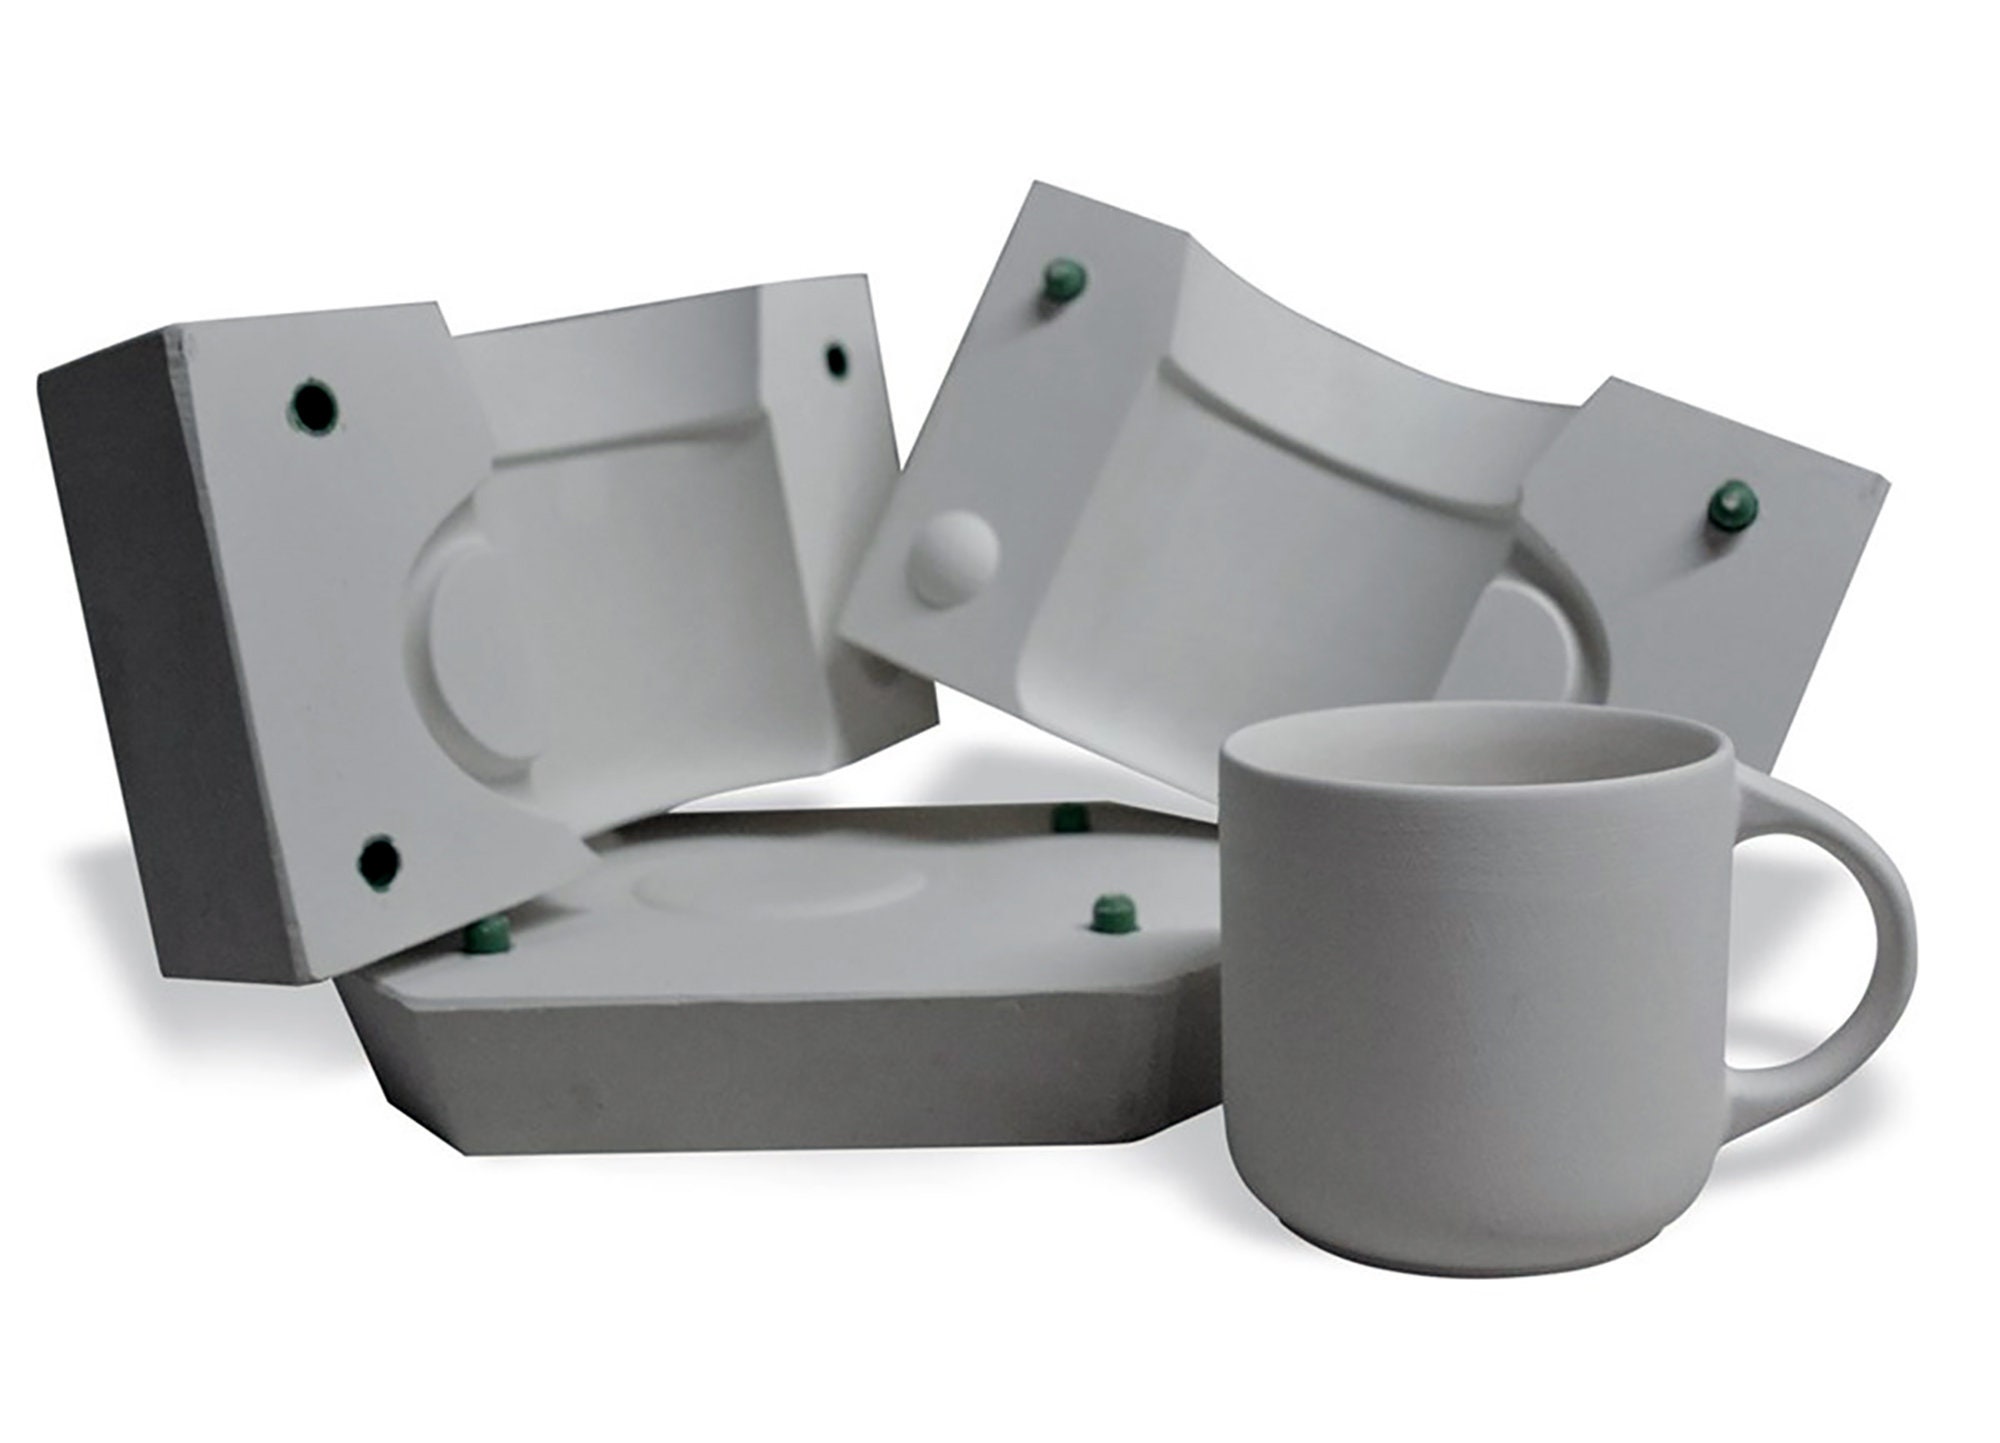 Casting Molds for Ceramic Mugs and Cups, Plaster Moulds for